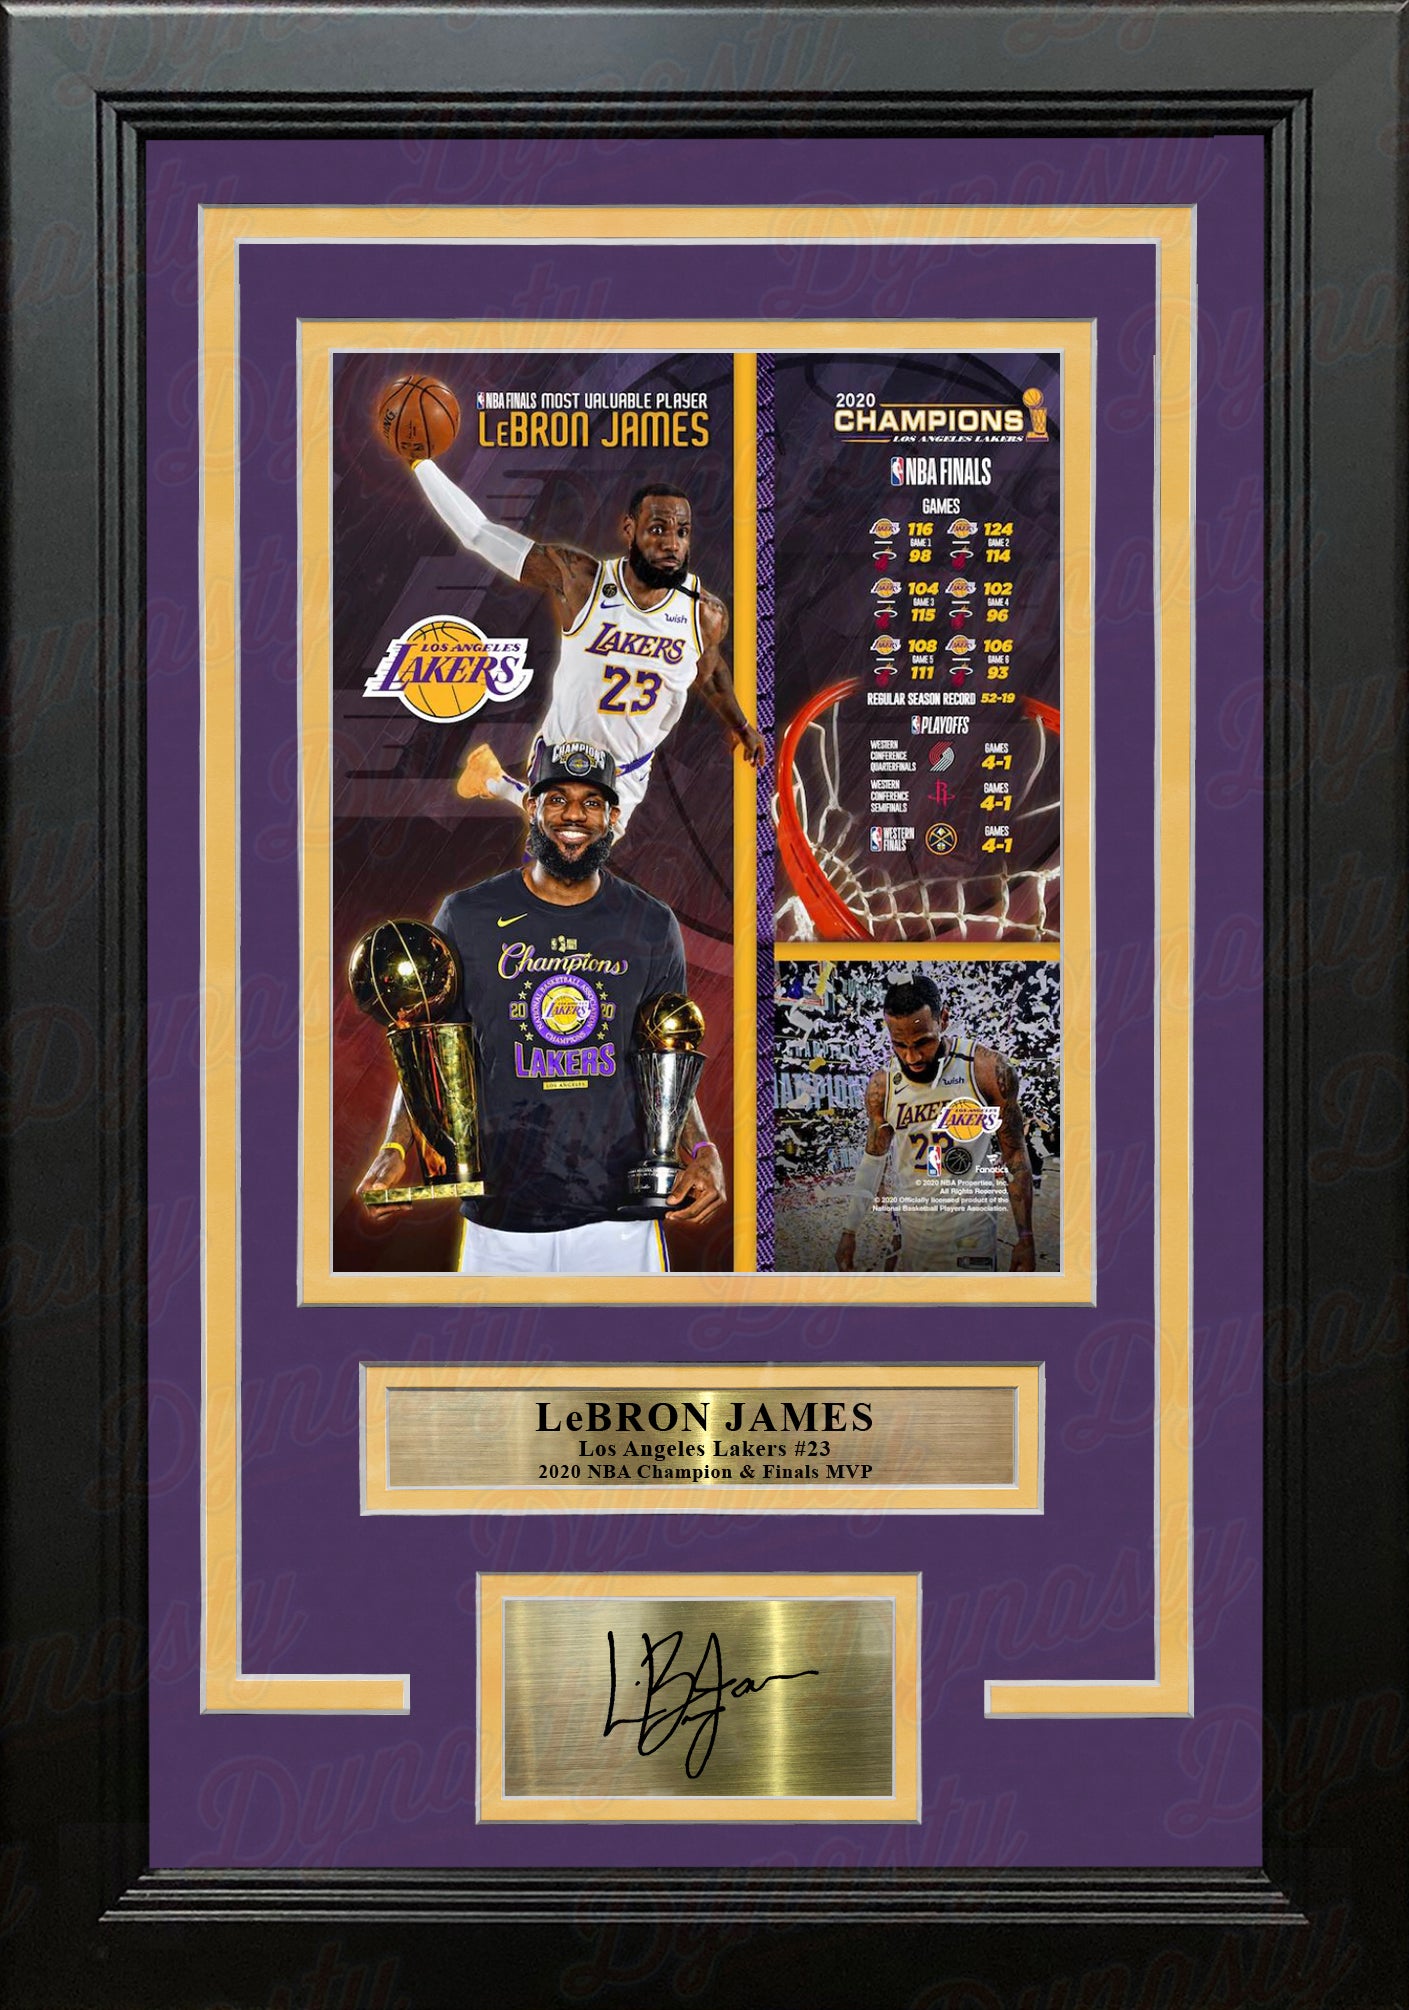 LeBron James 2020 NBA Champions LA Lakers 8x10 Framed Collage Photo with Engraved Autograph - Dynasty Sports & Framing 